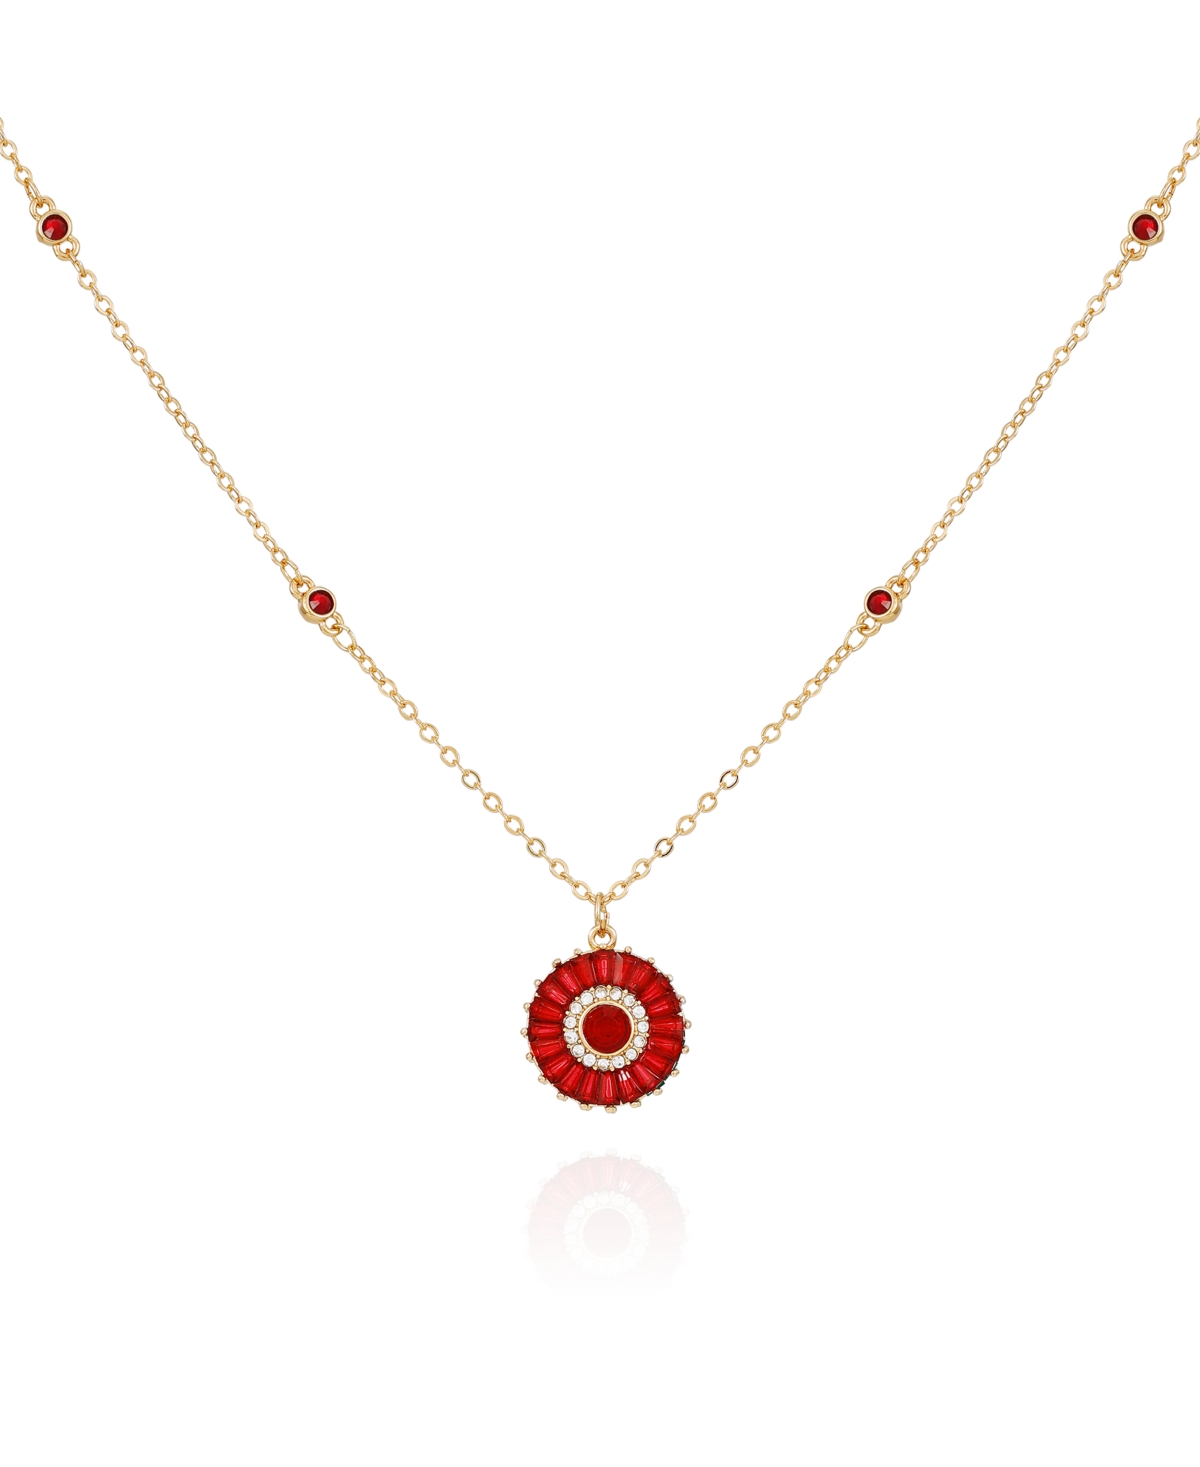 T Tahari Clear Glass Stone Pendant Charm Necklace In Red